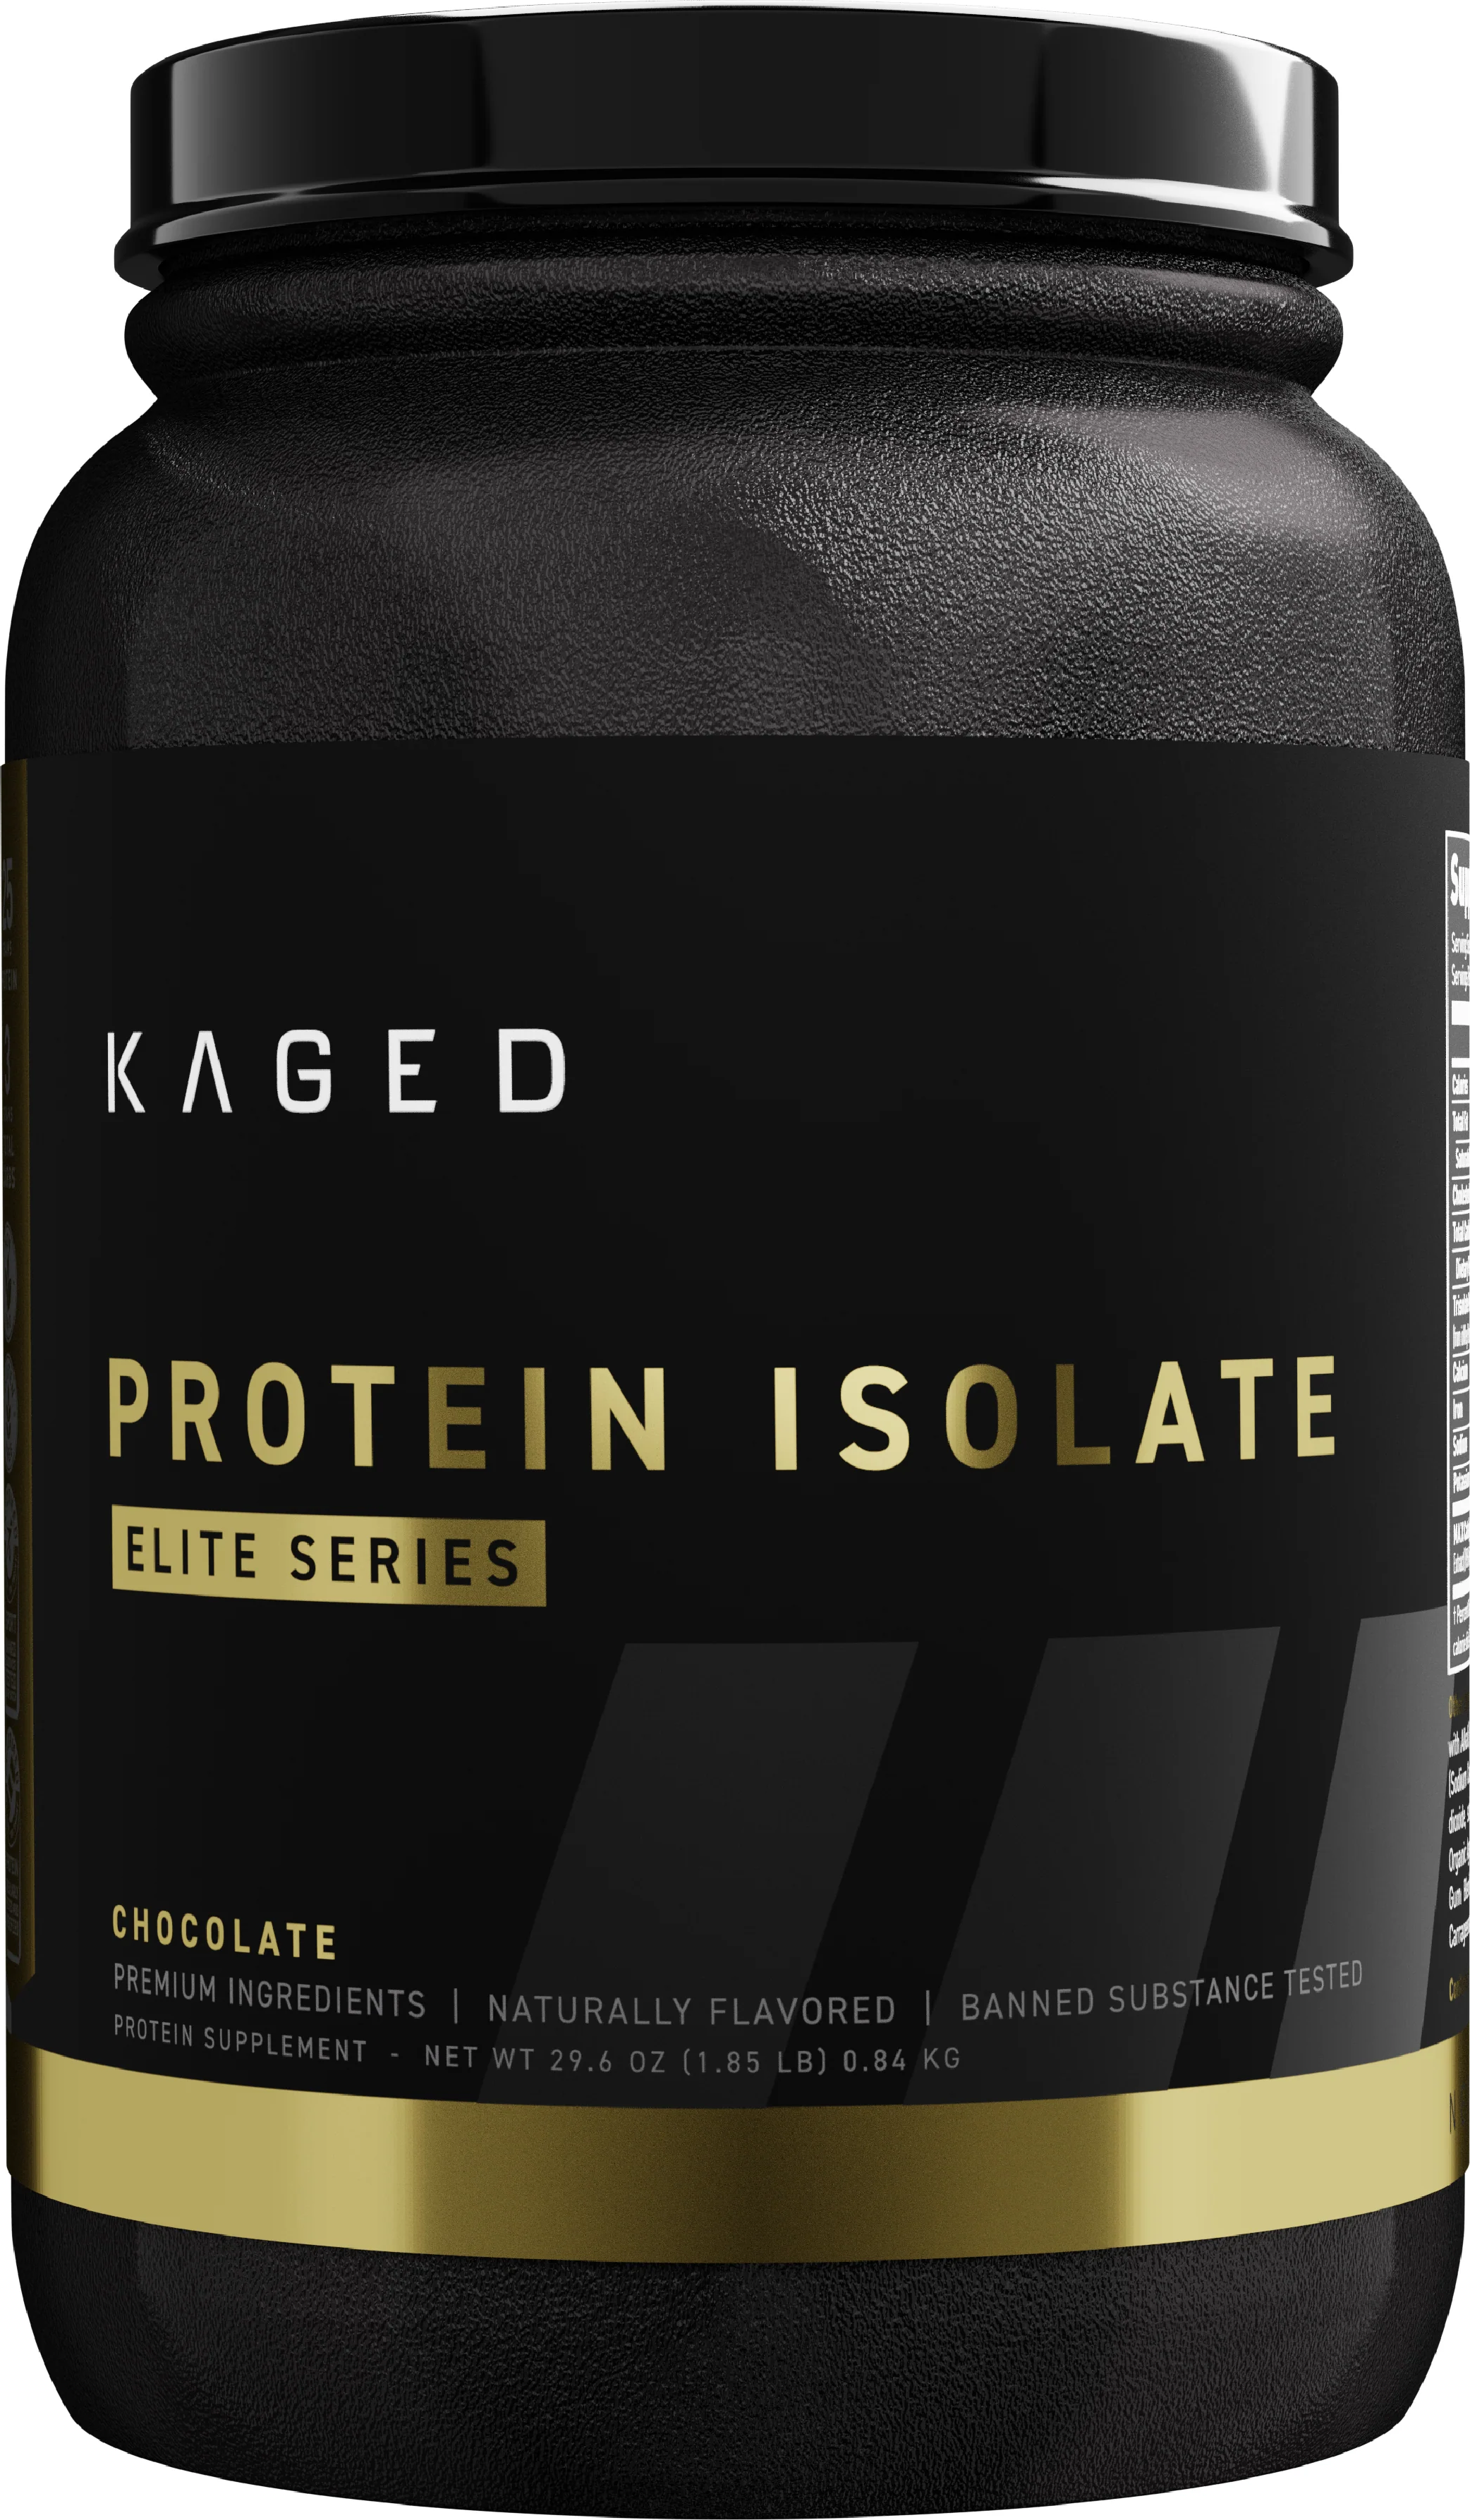 https://www.priceplow.com/static/images/products/kaged-protein-isolate-elite.png